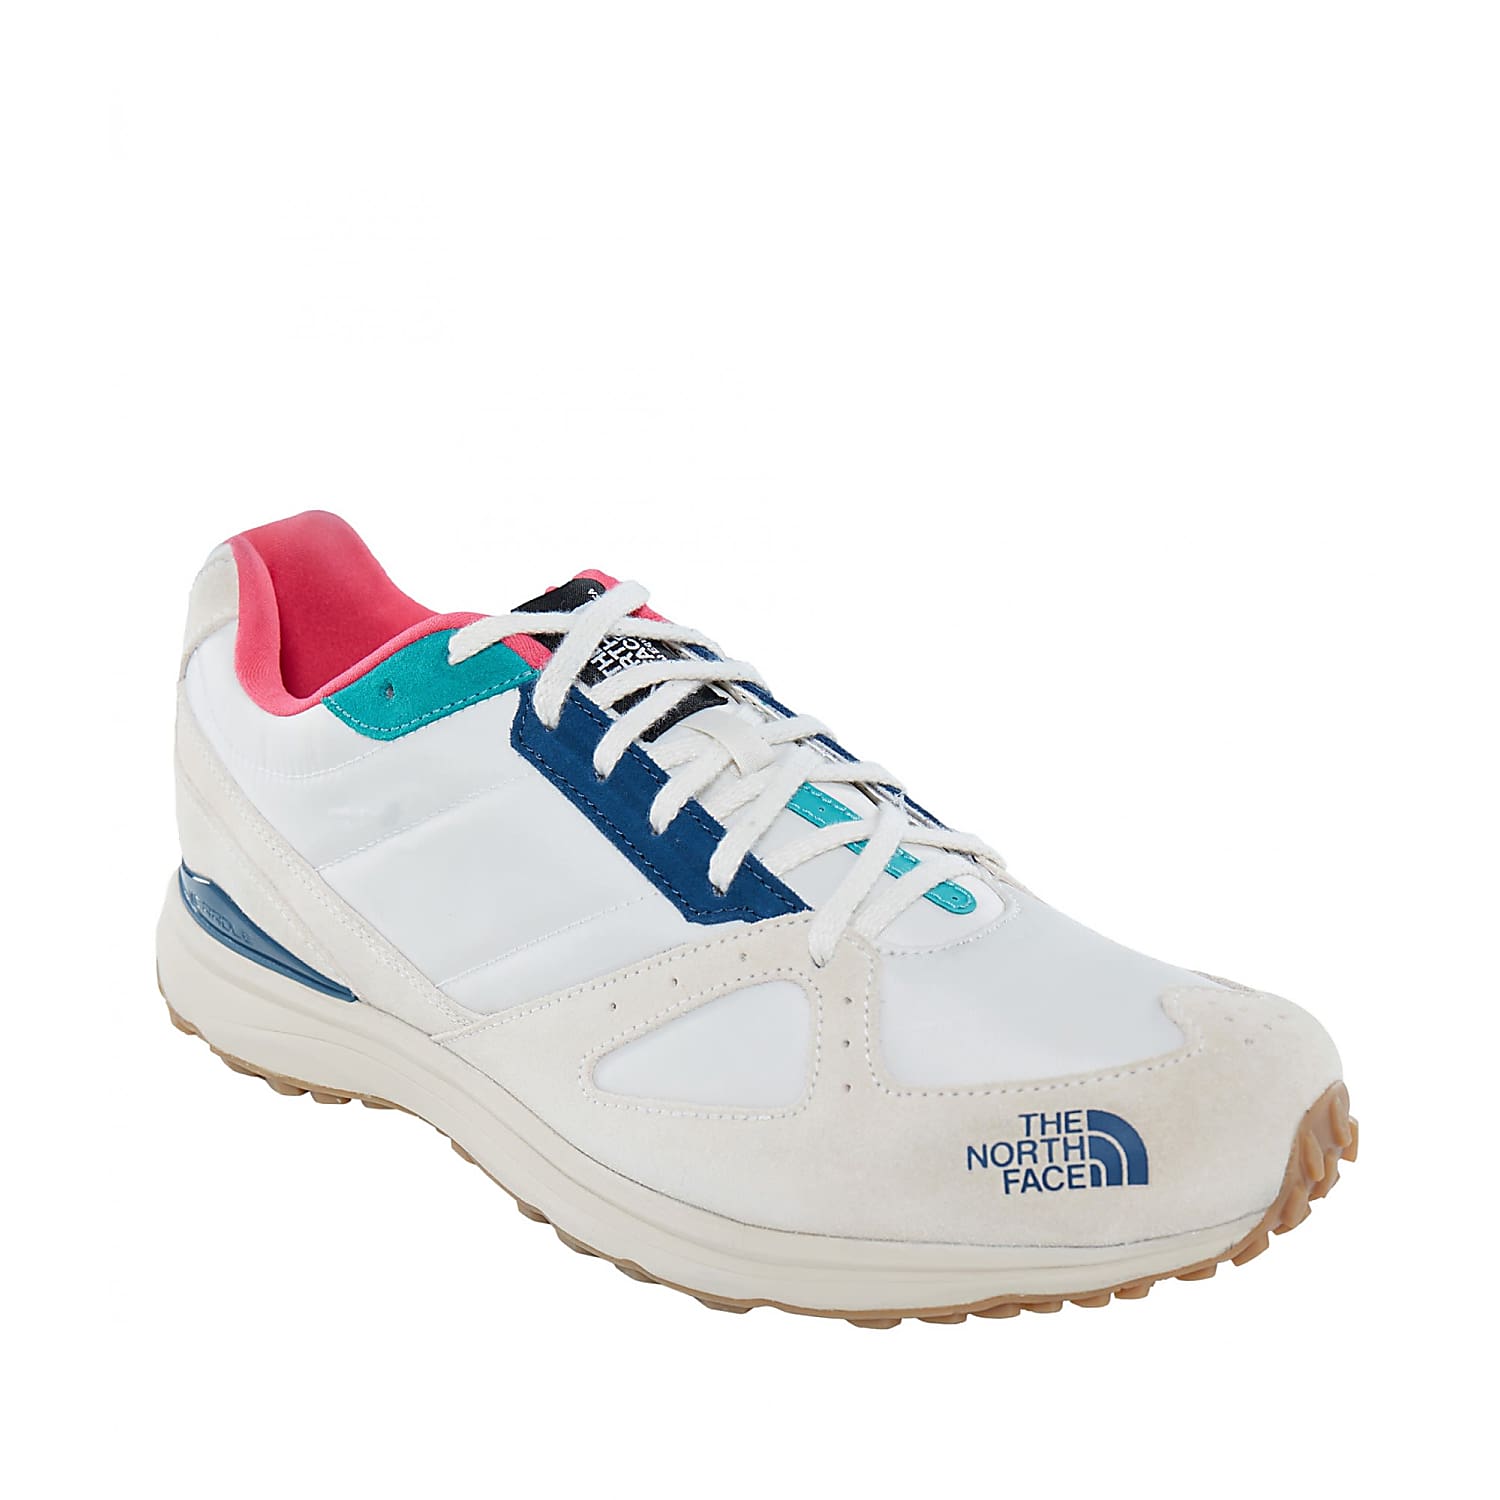 The North Face M TRAVERSE TR Vintage White - Blue Wing Teal - Free Shipping at 60£ - www.exxpozed.eu